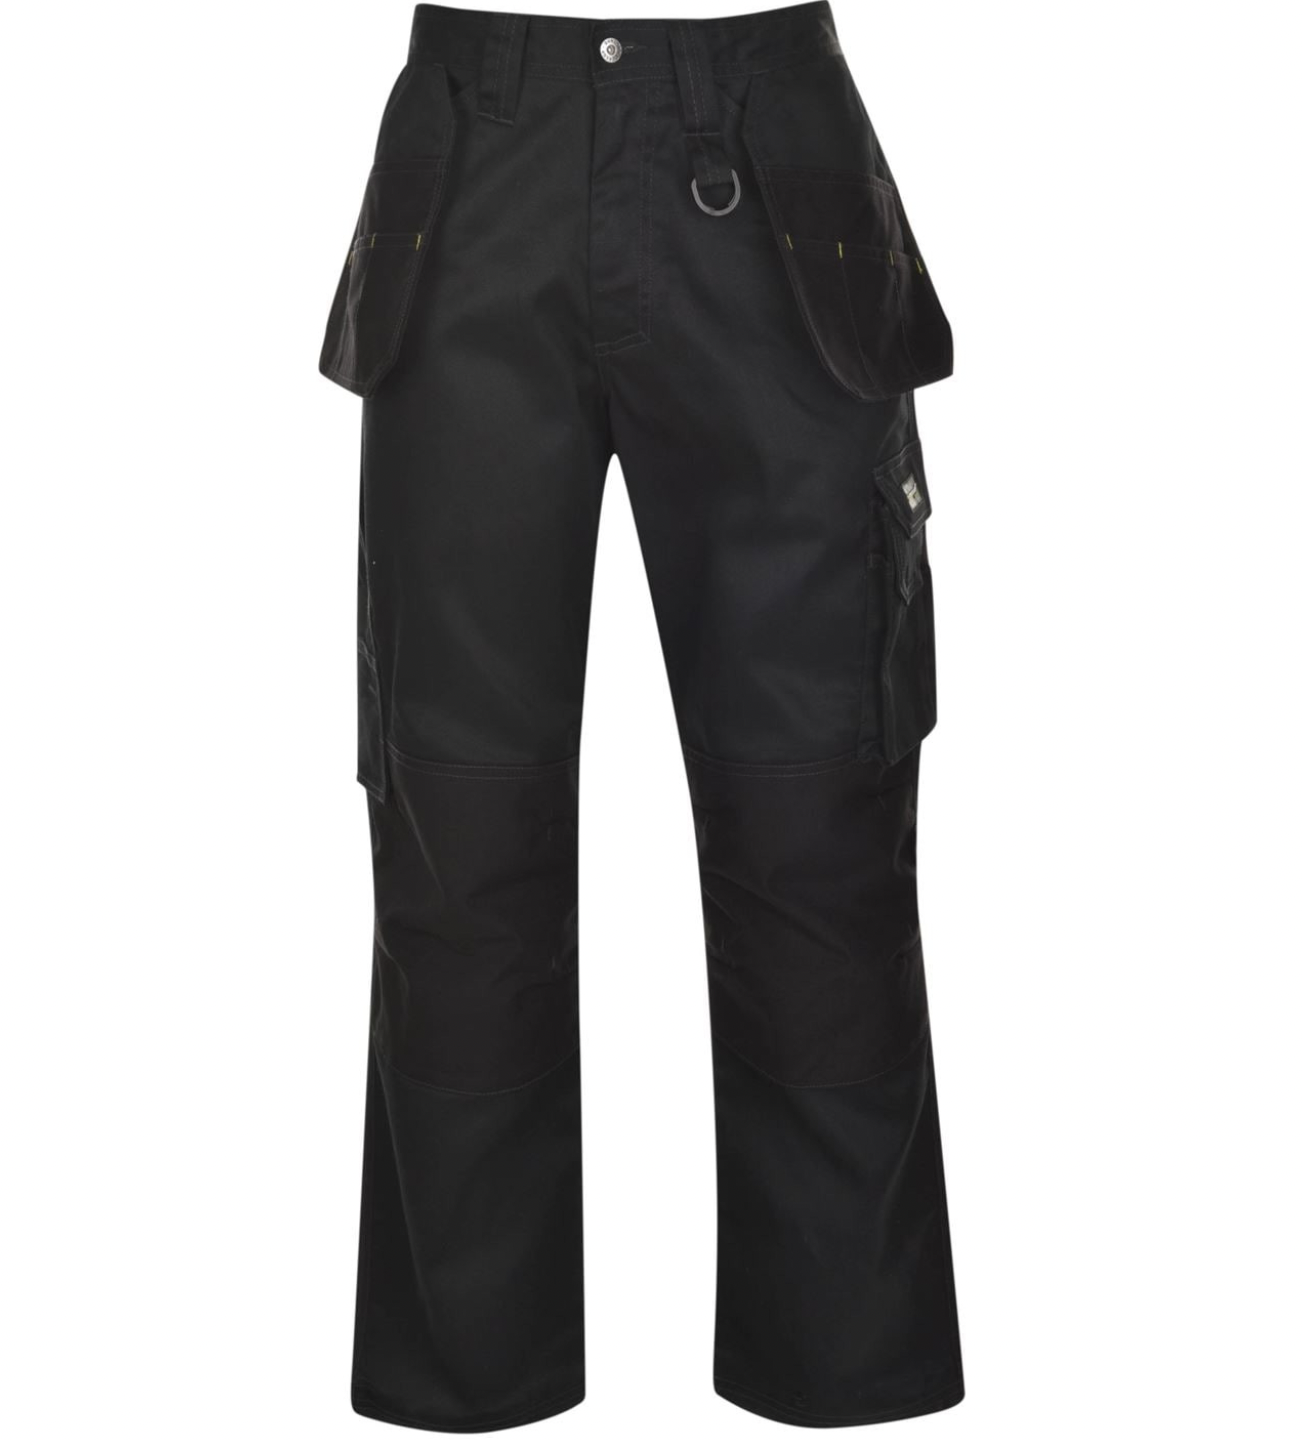 Dunlop Men  Craft Workwear Utility Trousers  BlackCharcoal  Parallel  Import  Buy Online in South Africa  takealotcom